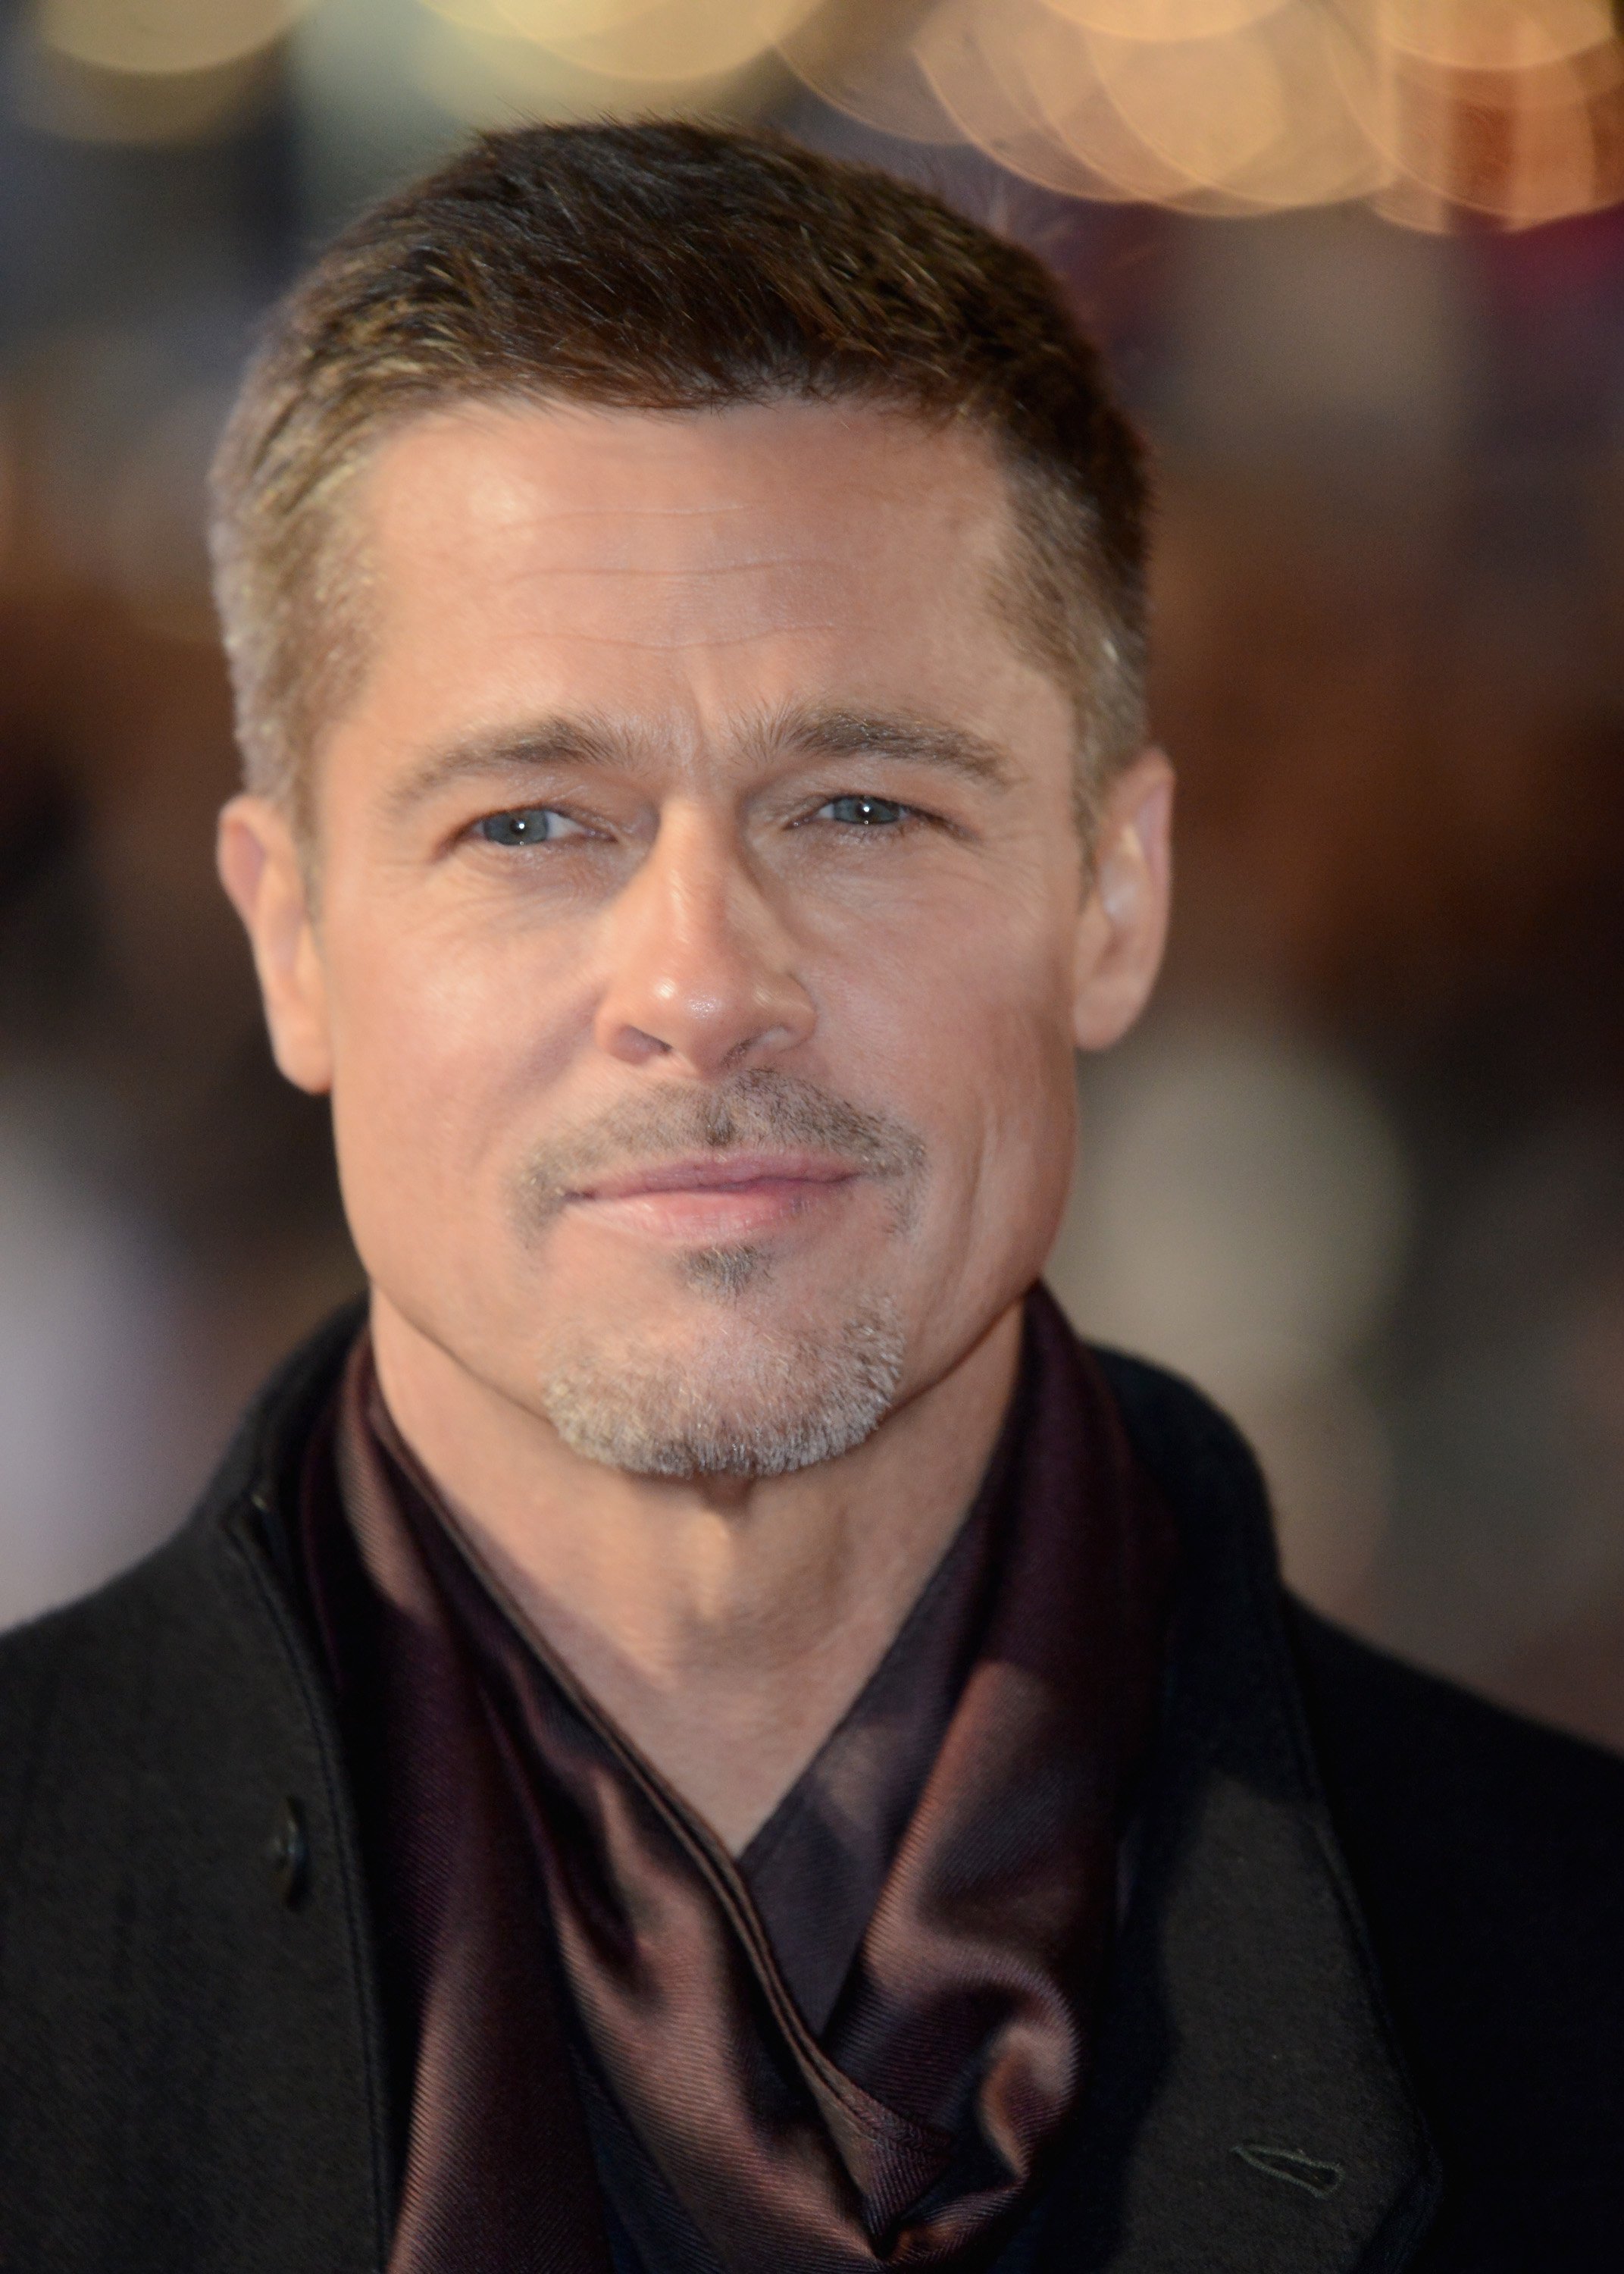 Brad Pitt 'Caught On Date' With New Woman After Angelina Jolie Split